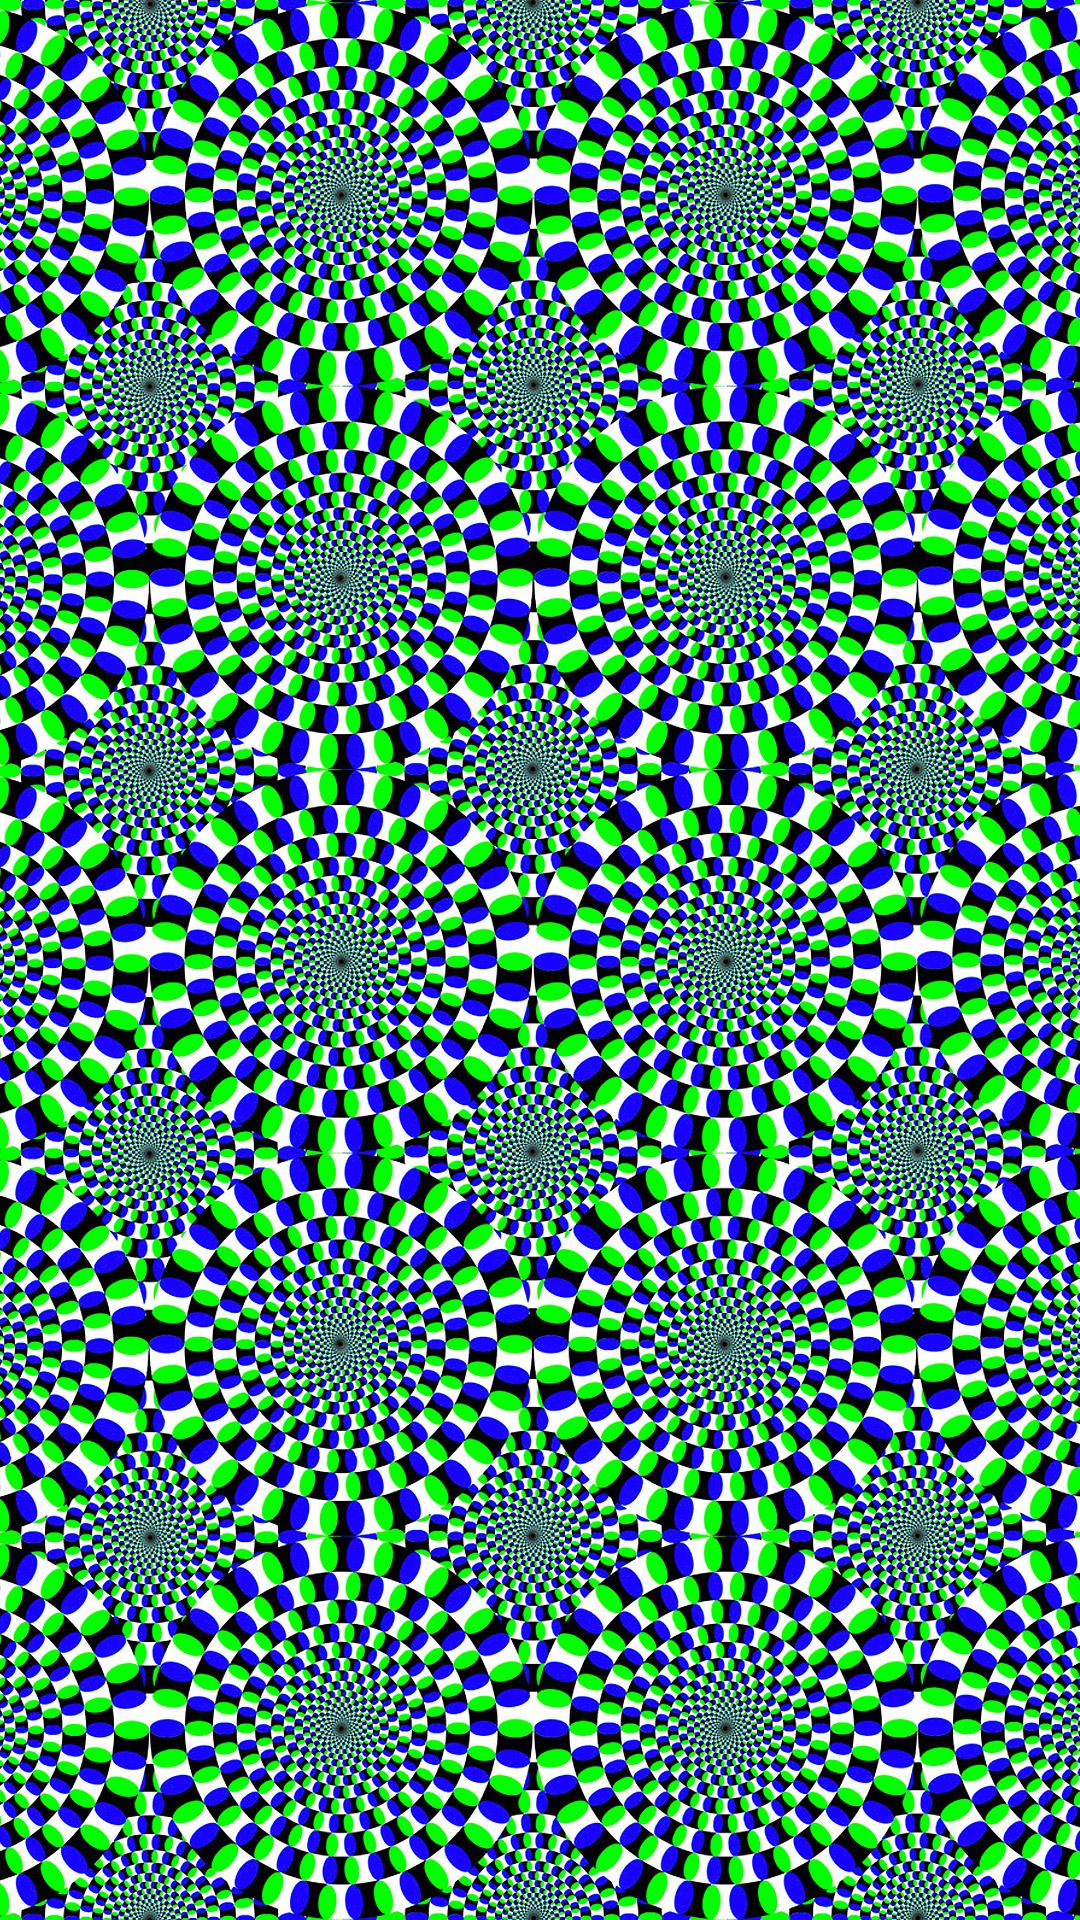 1080 x 1920 · jpeg - Moving Optical Illusions Wallpapers - Wallpaper Cave